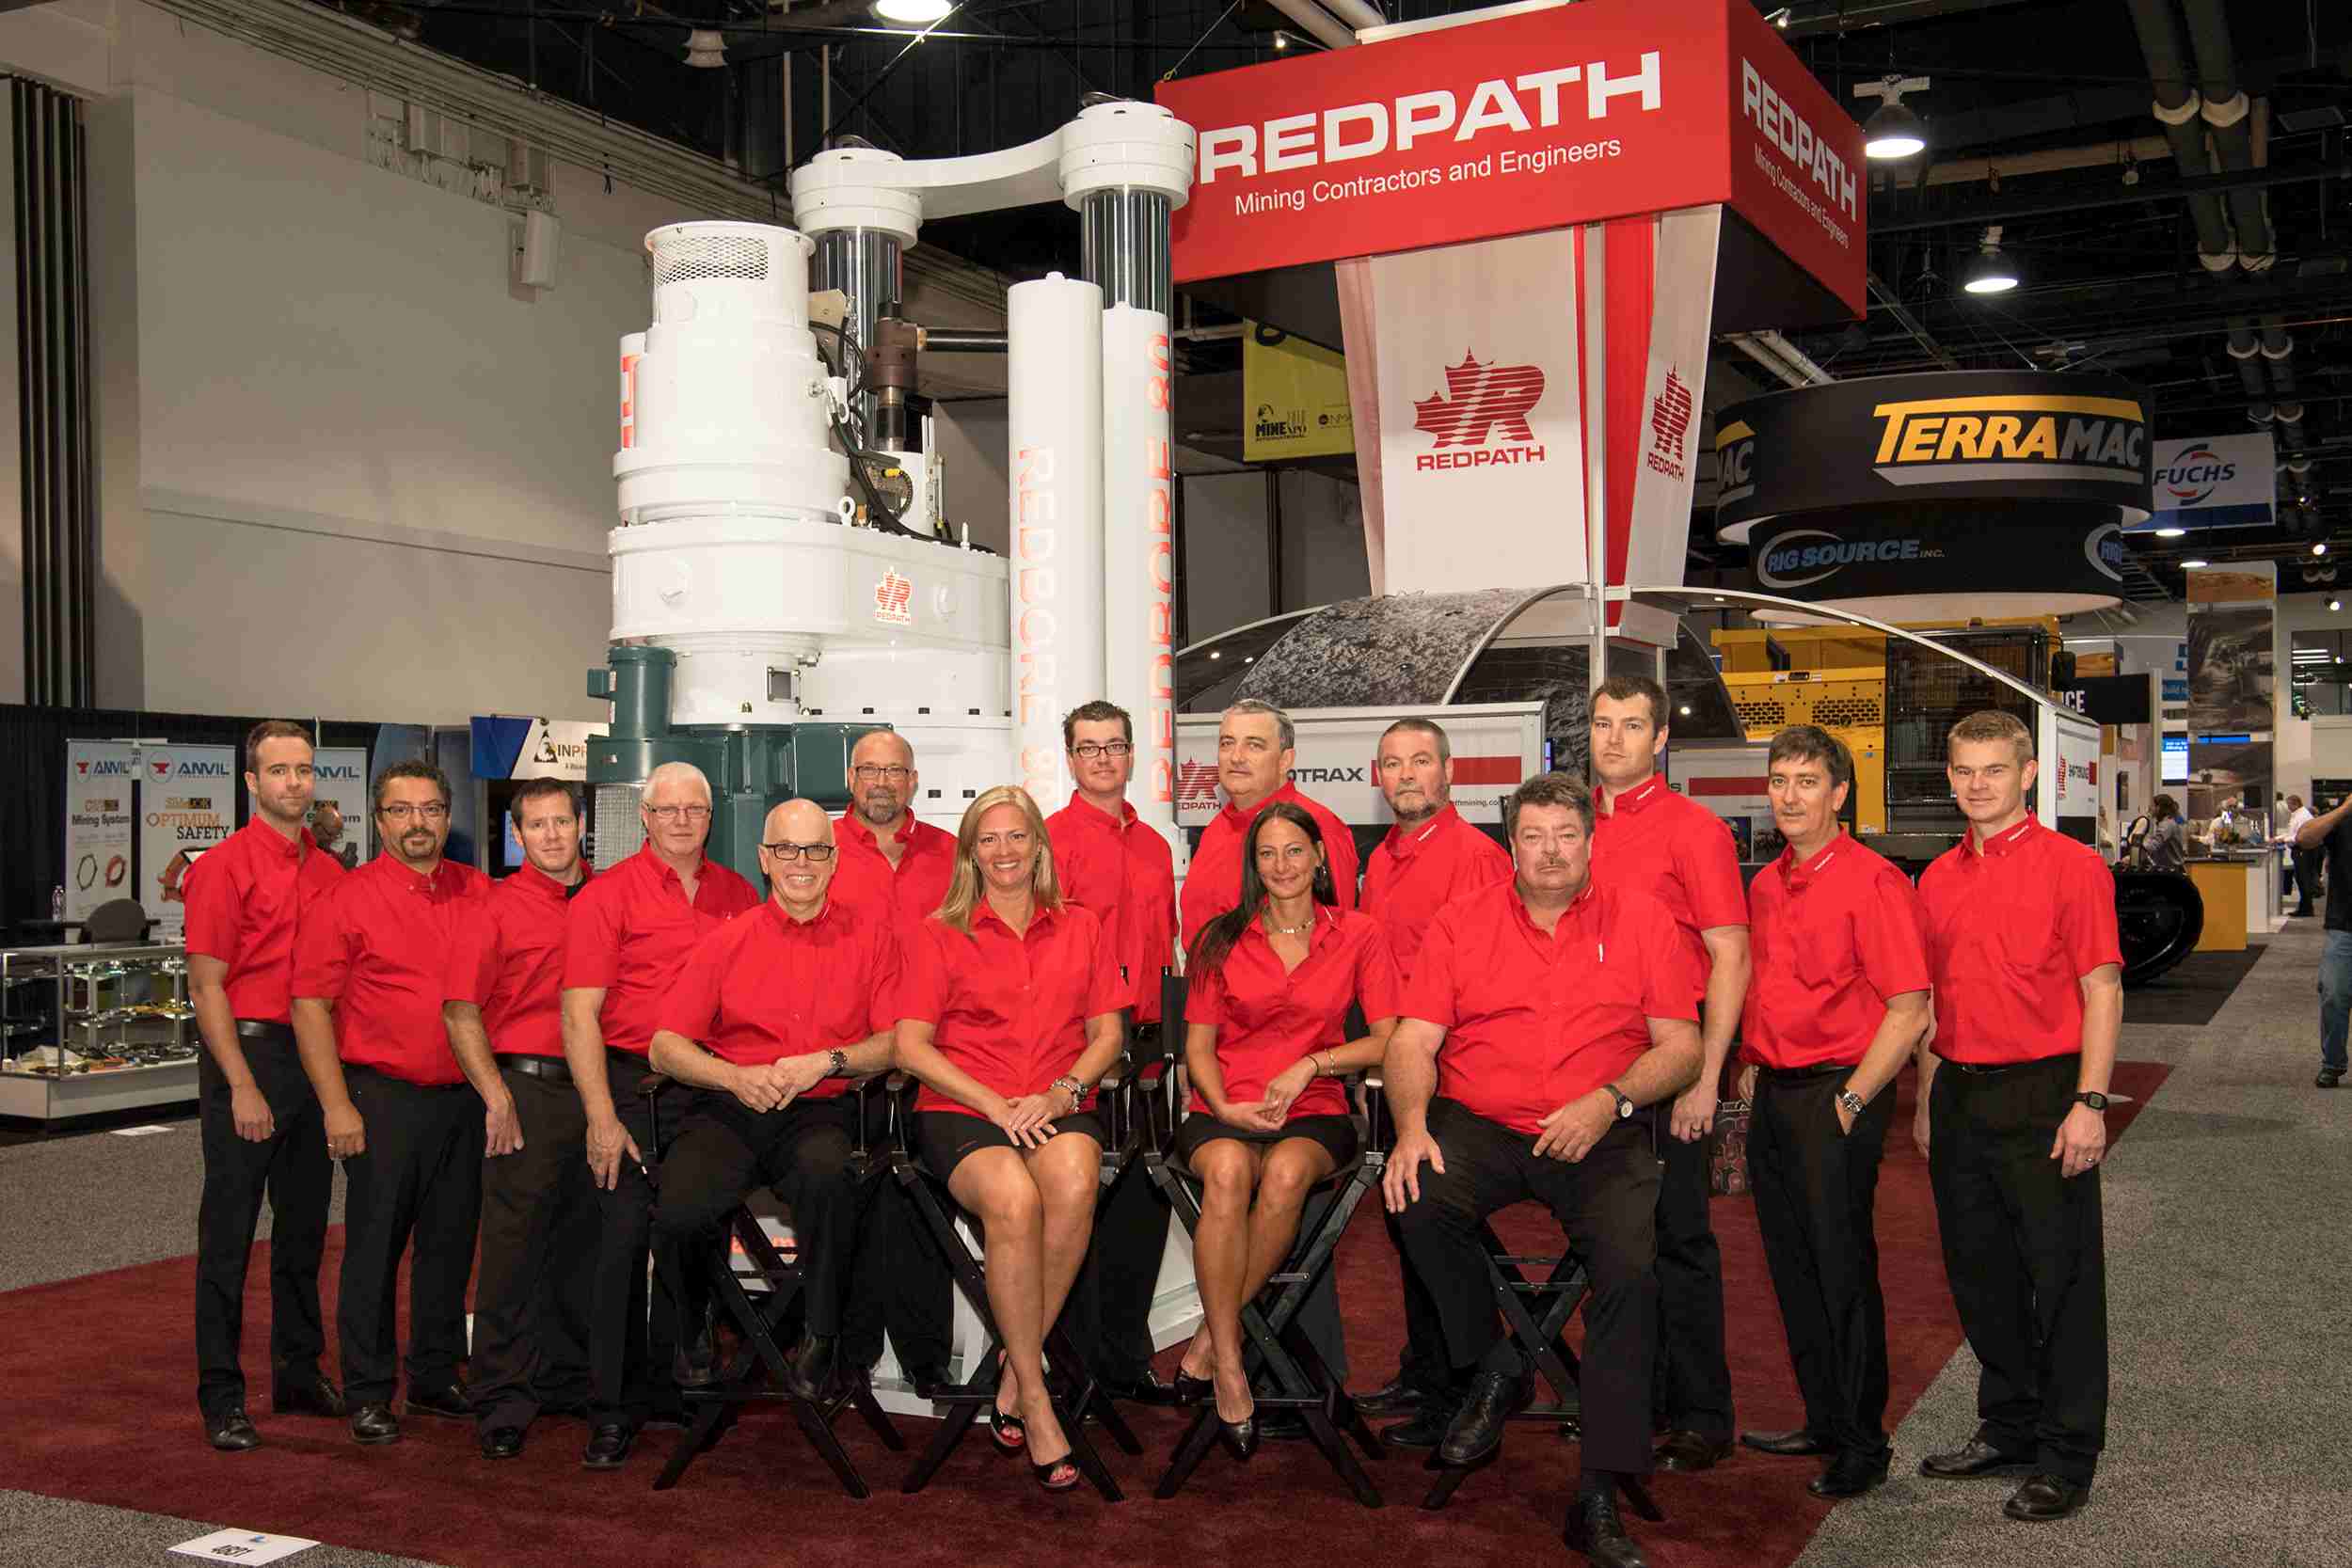 A large group photo of Redpath employees at the 2016 Minexpo booth.